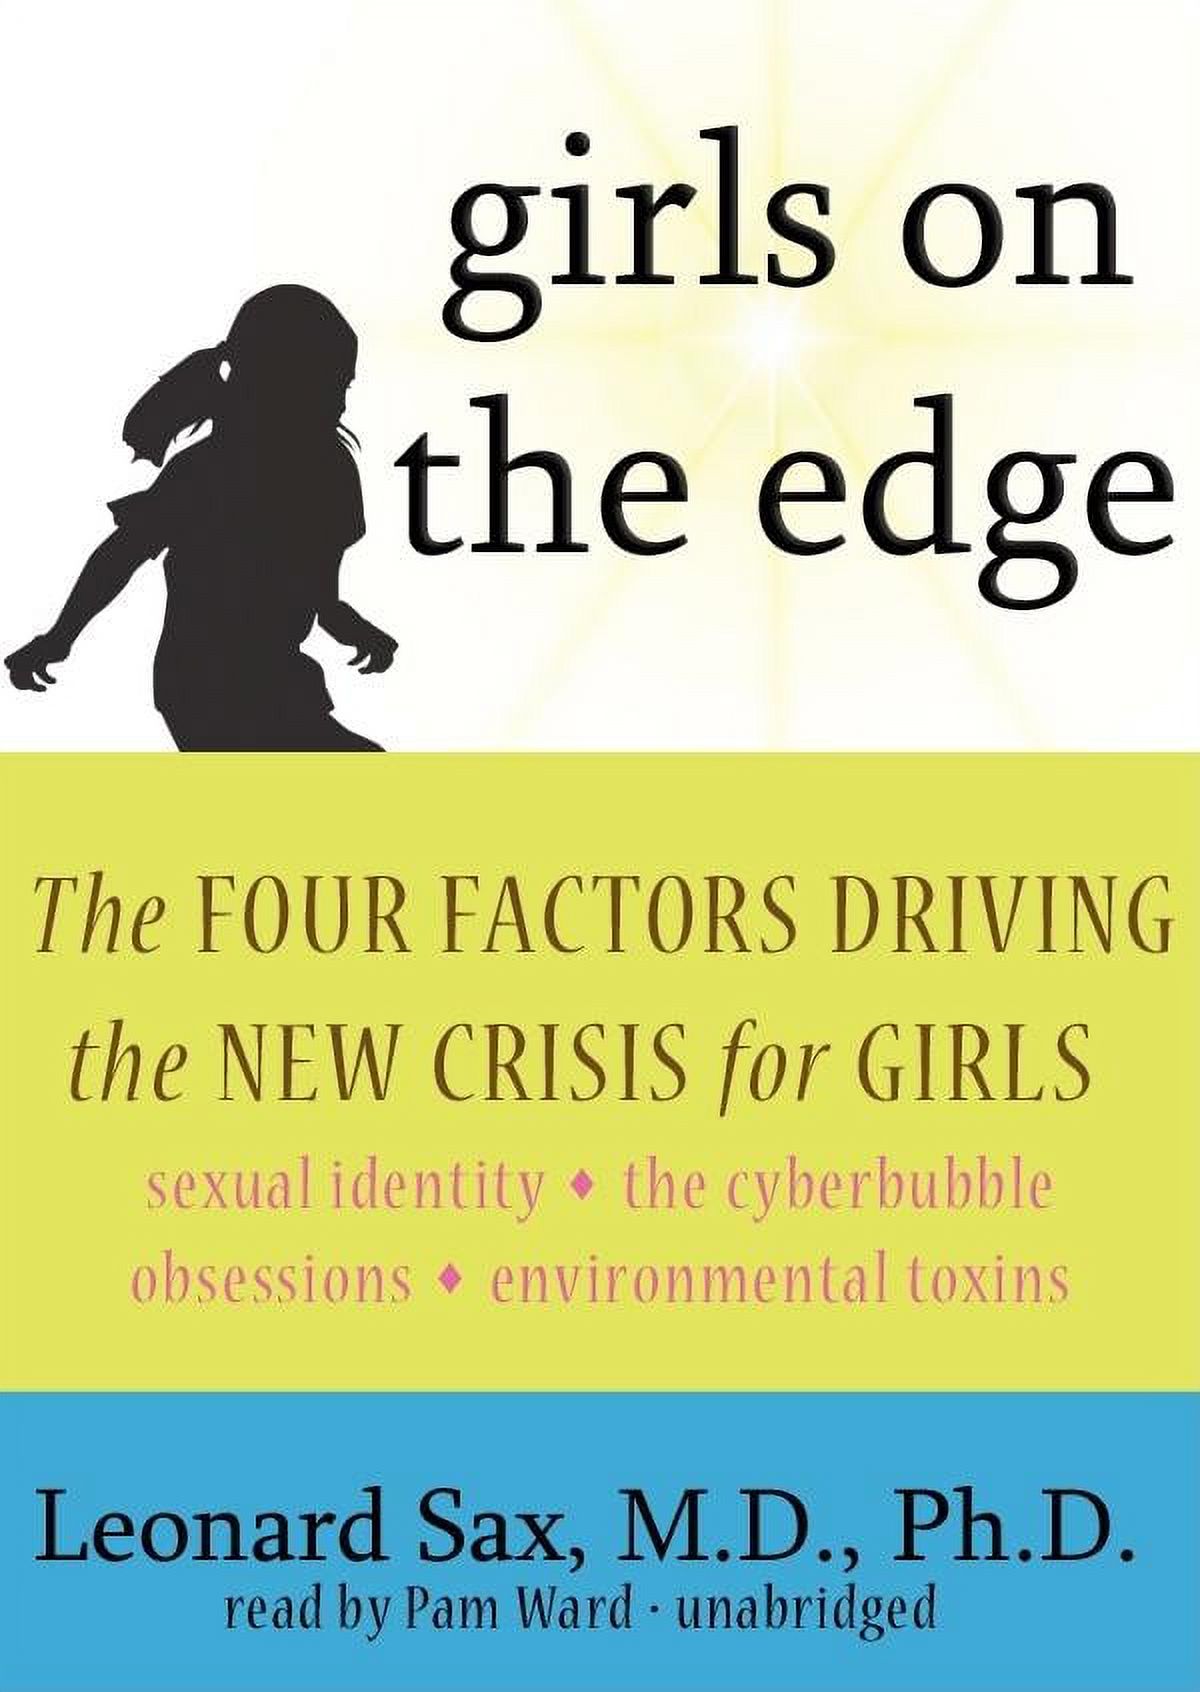 Girls on the Edge: The Four Factors Driving the New Crisis for Girls: Sexual Identity, the Cyberbubble, Obsessions, Environmental Toxins (Audiobook) - image 1 of 1